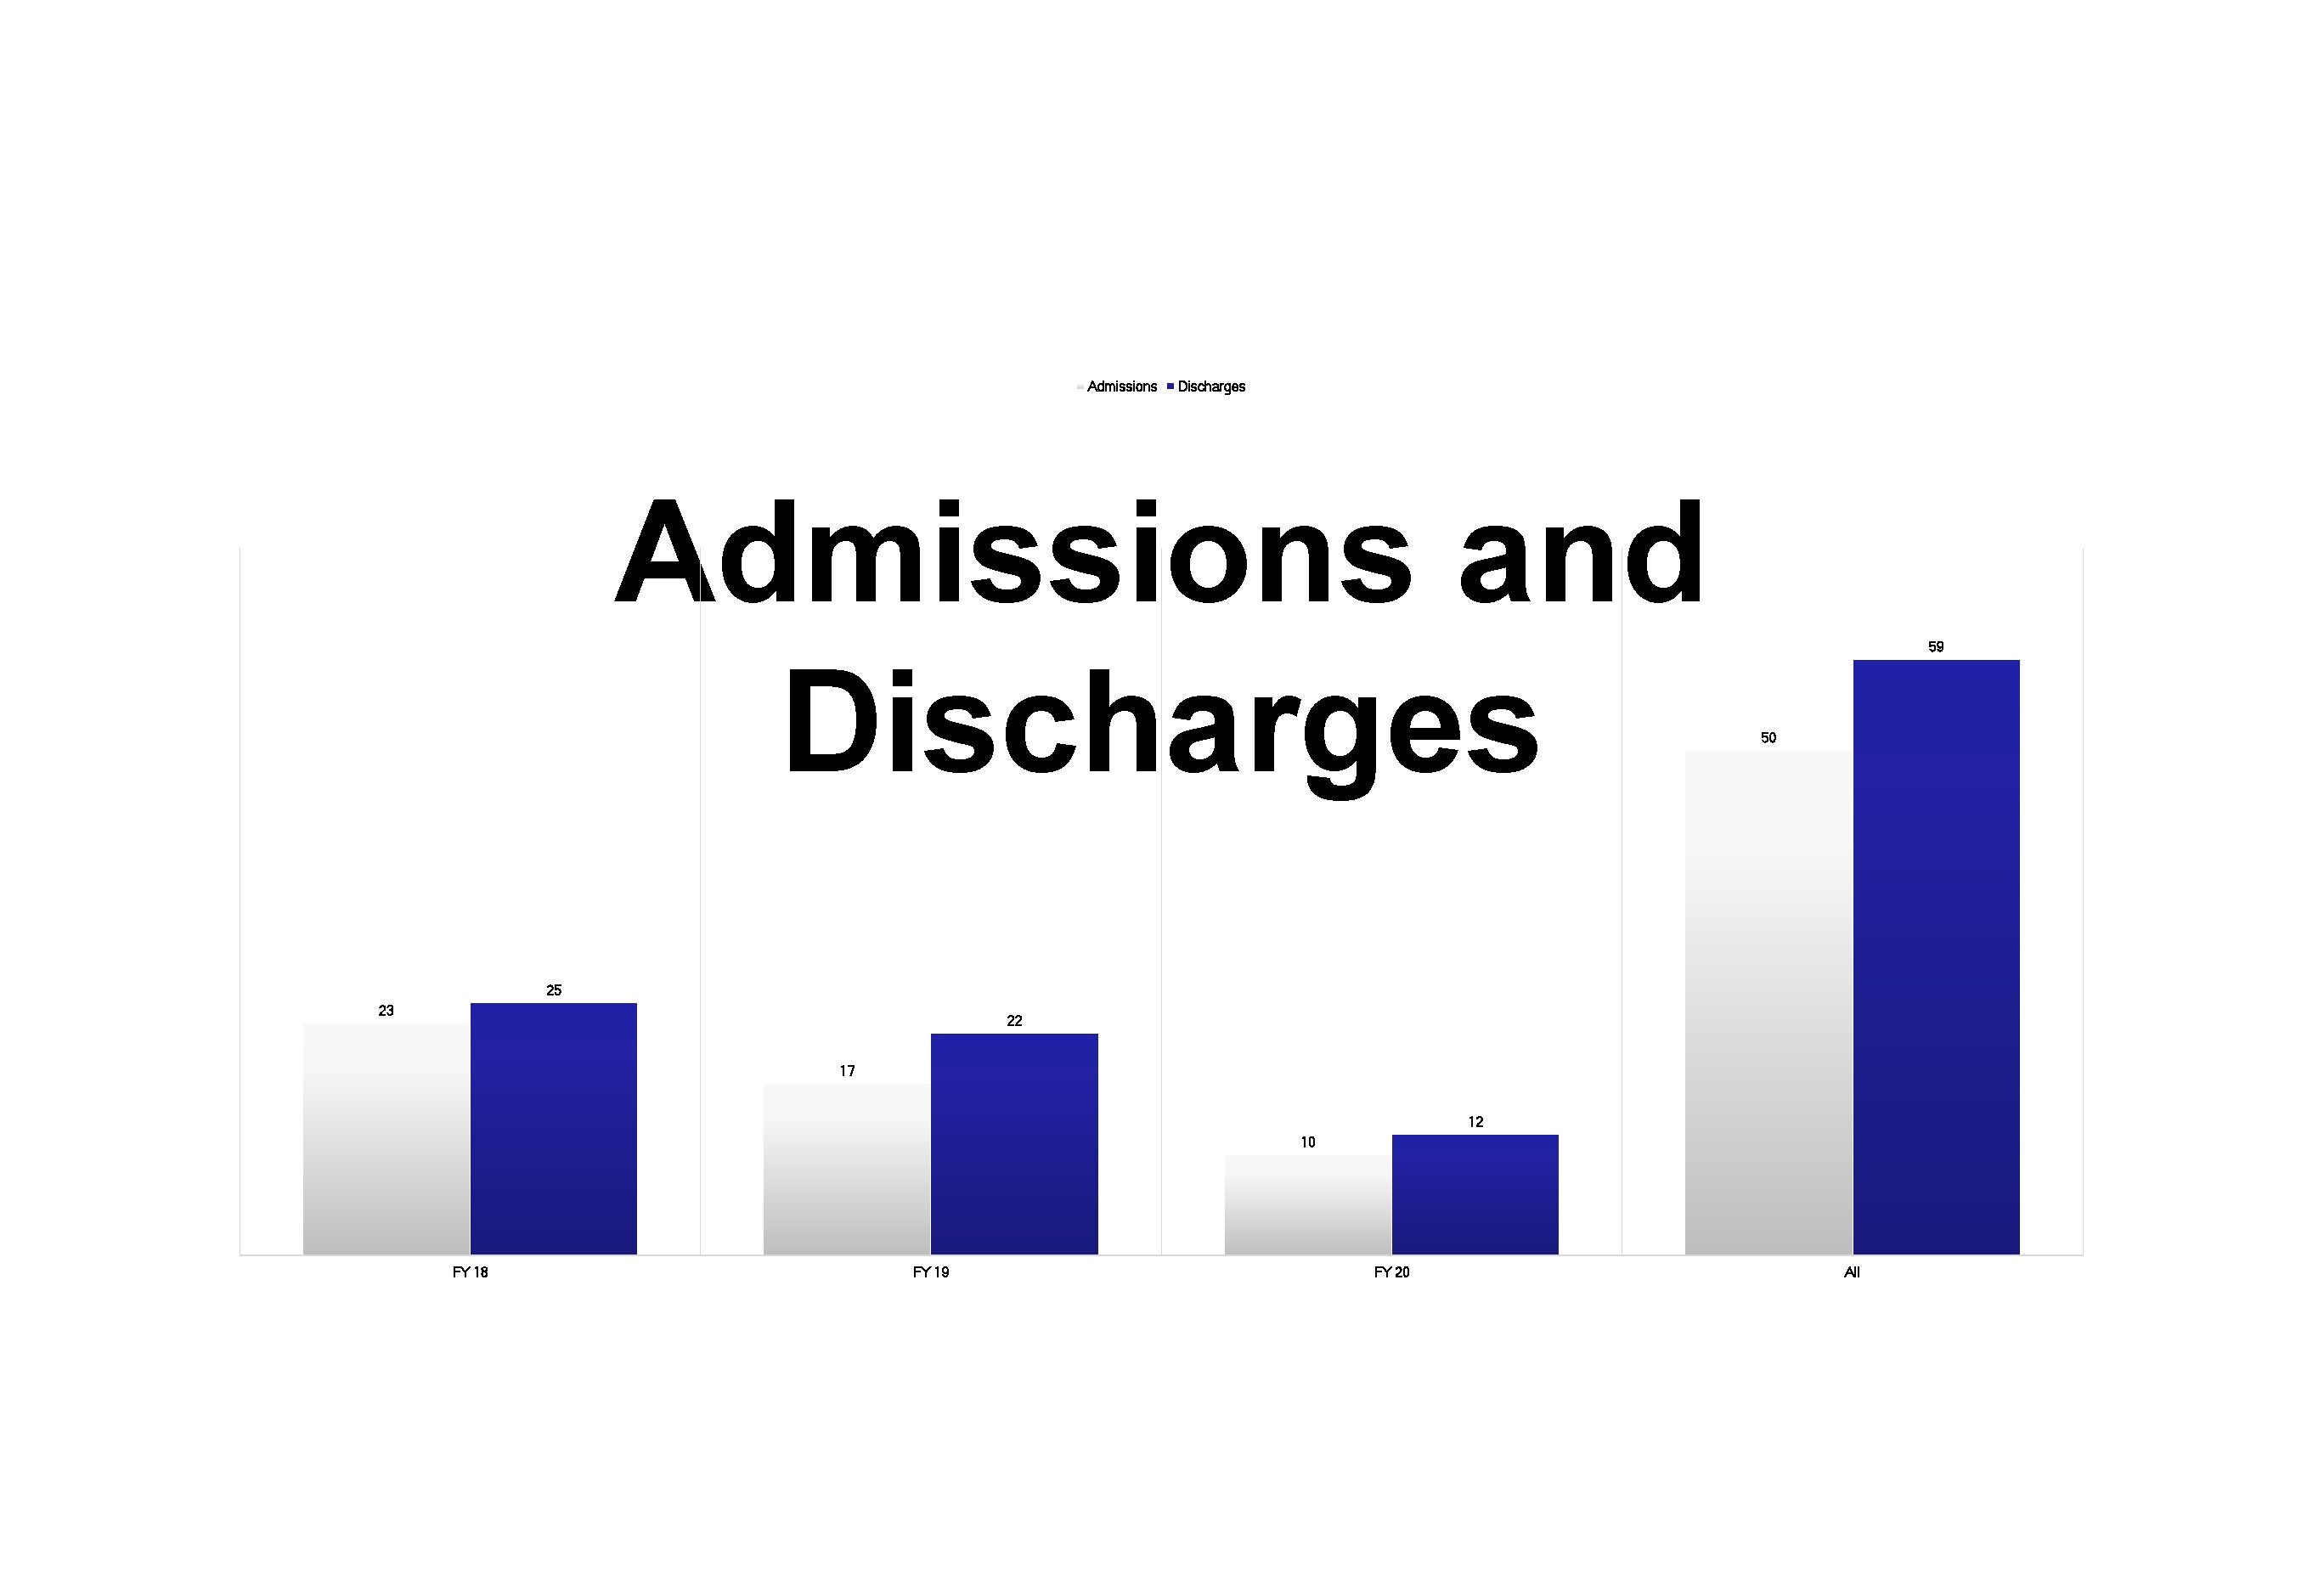 Admissions Discharges Admissions and Discharges 59 50 25 23 22 17 12 10 FY